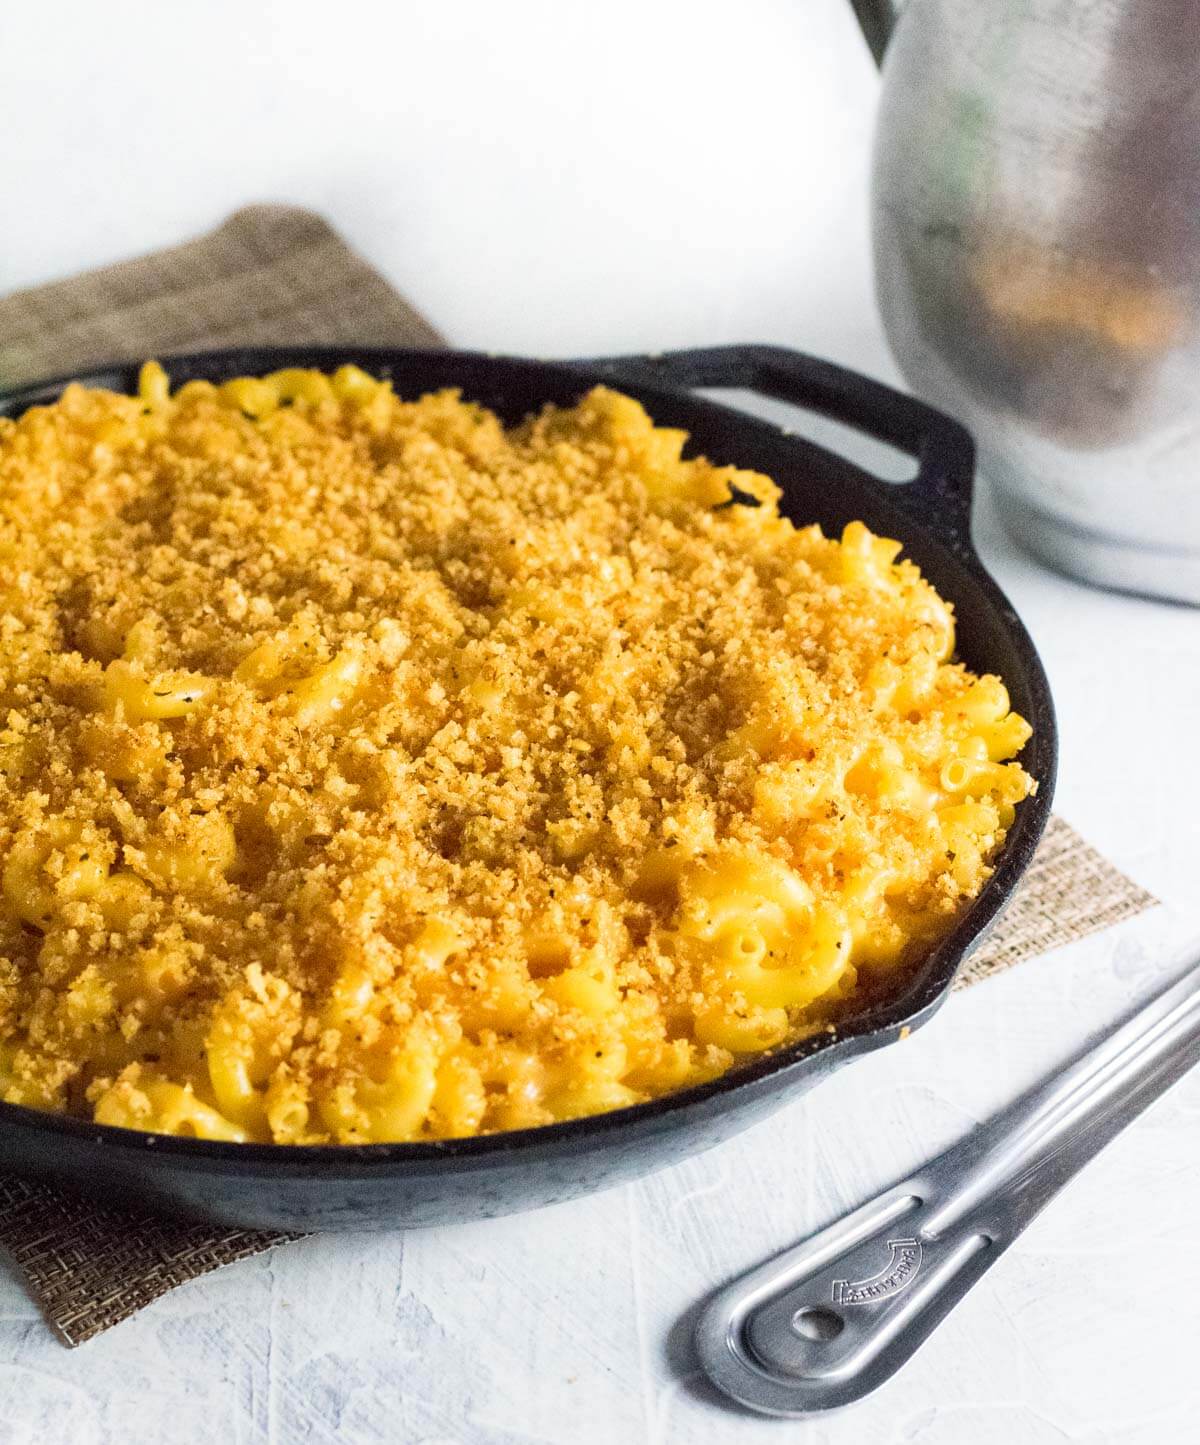 Serving smoked mac and cheese.